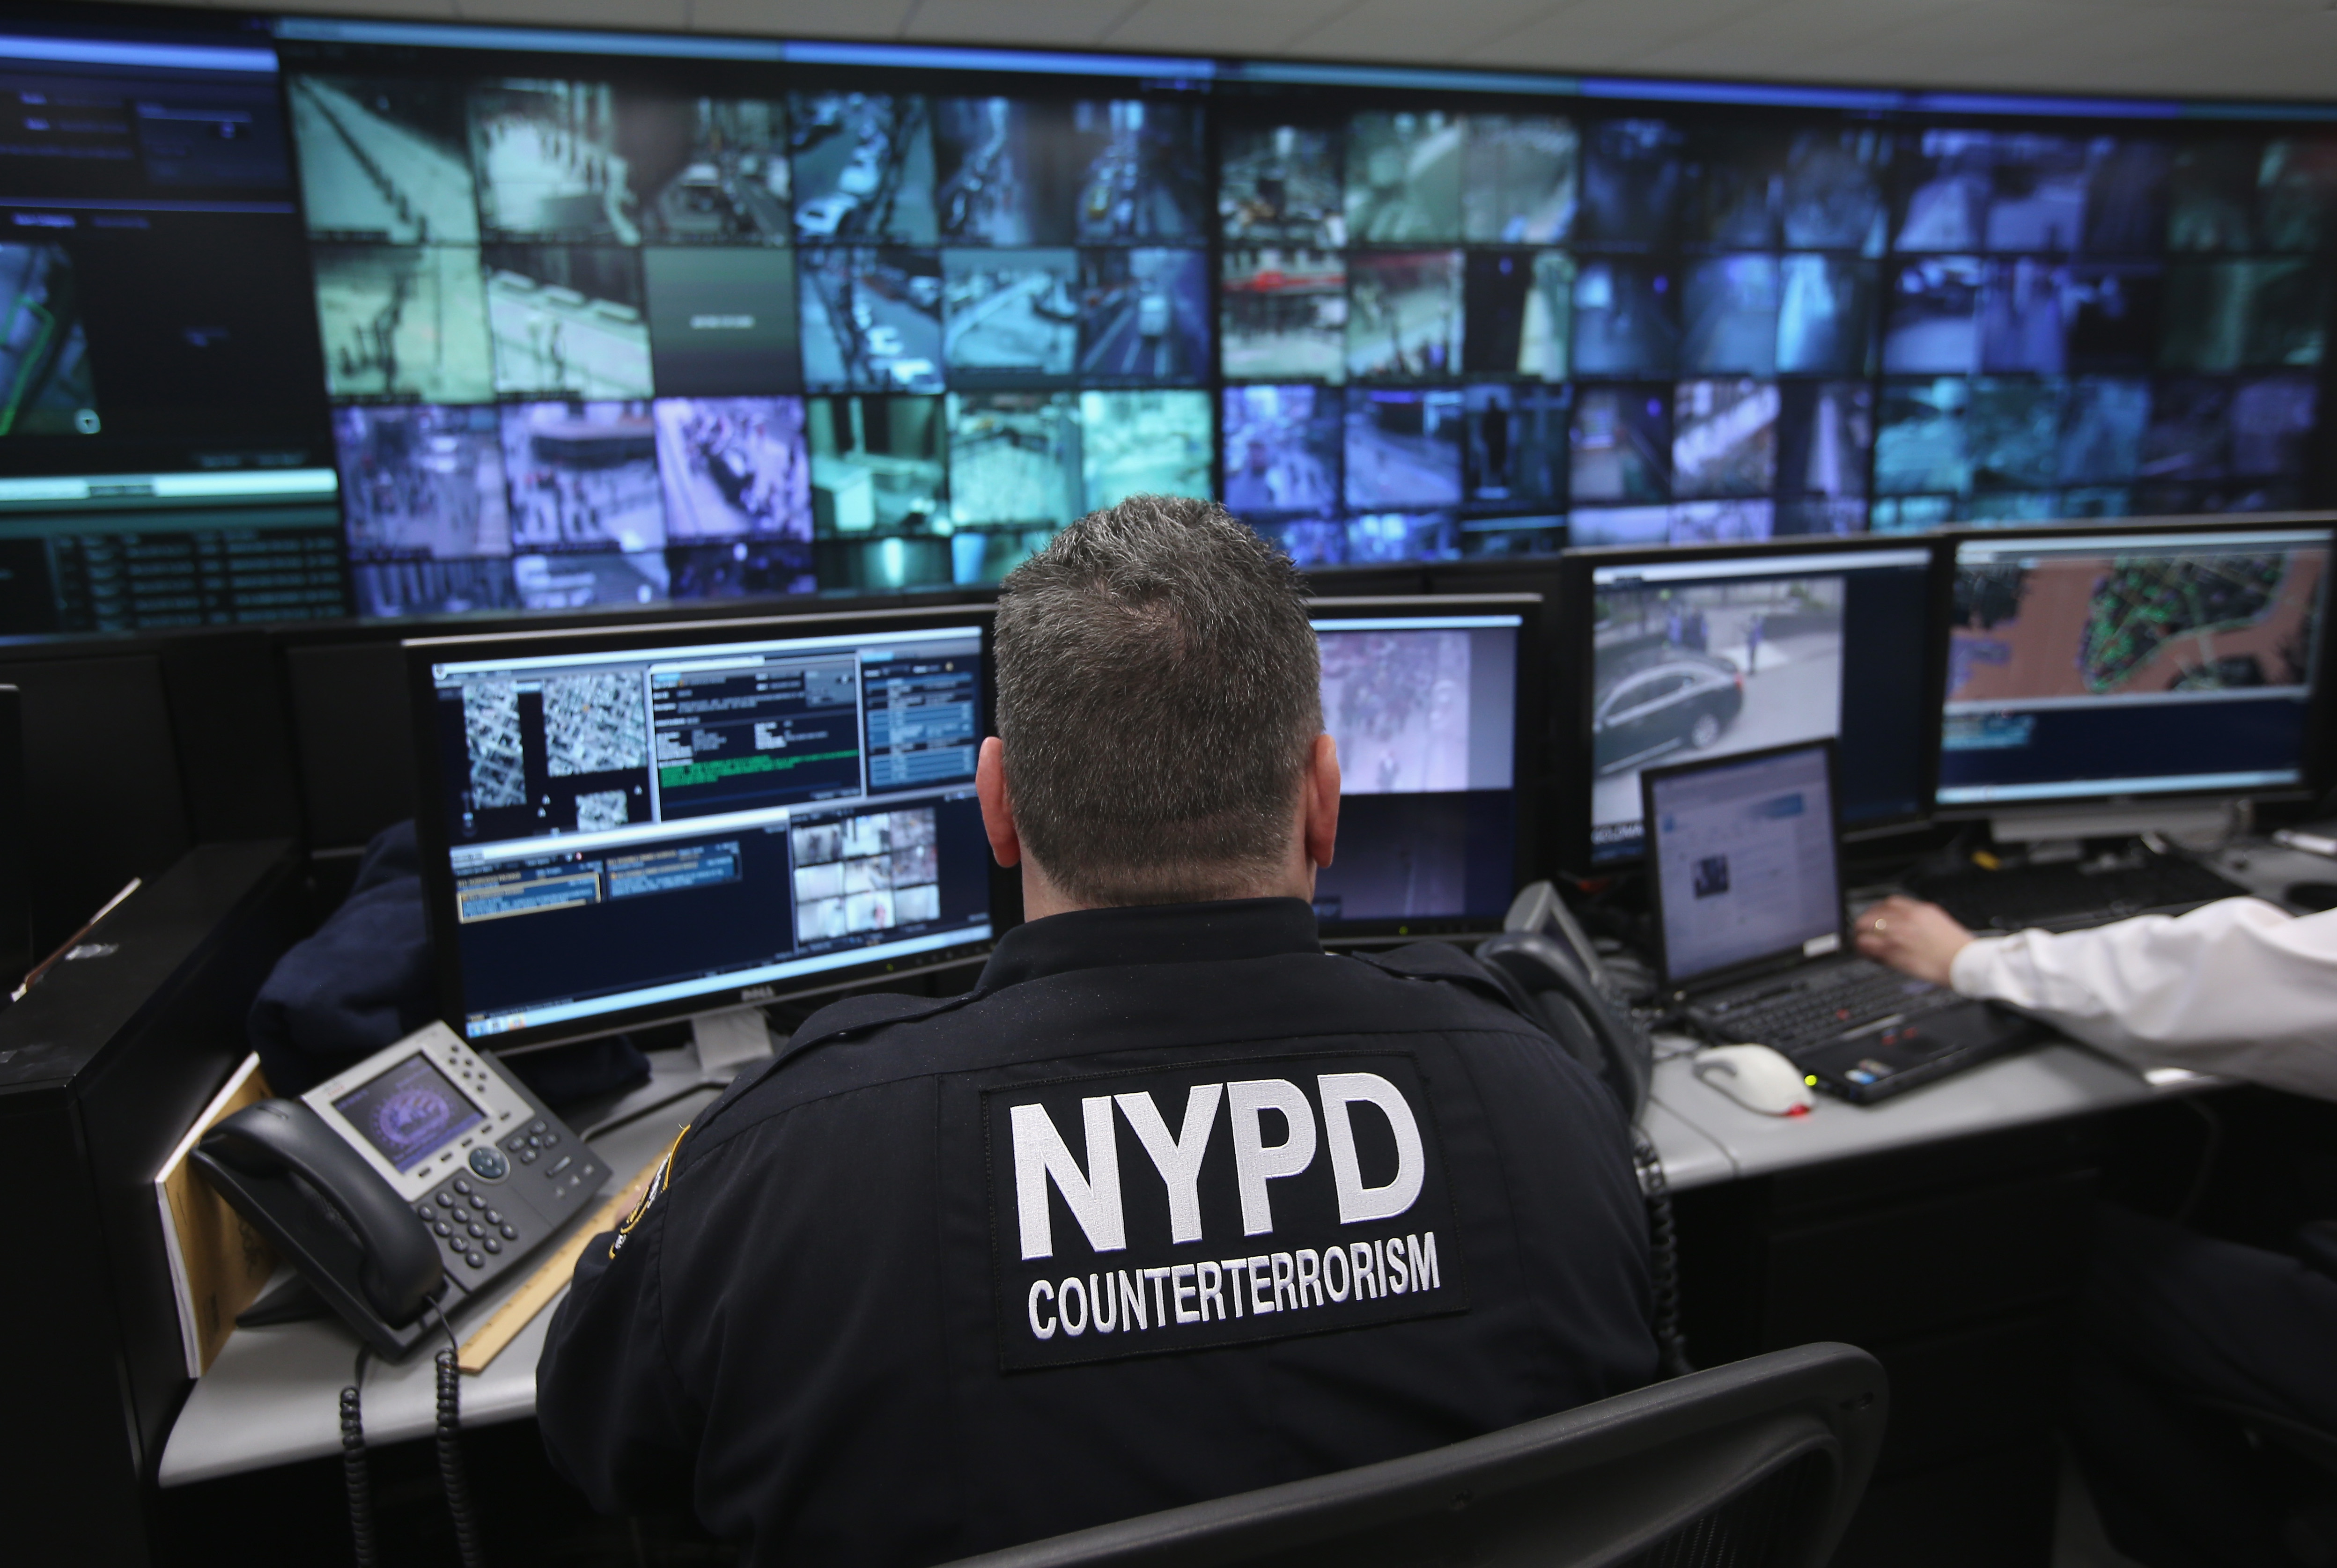 An NYPD officer watches security camera footage.